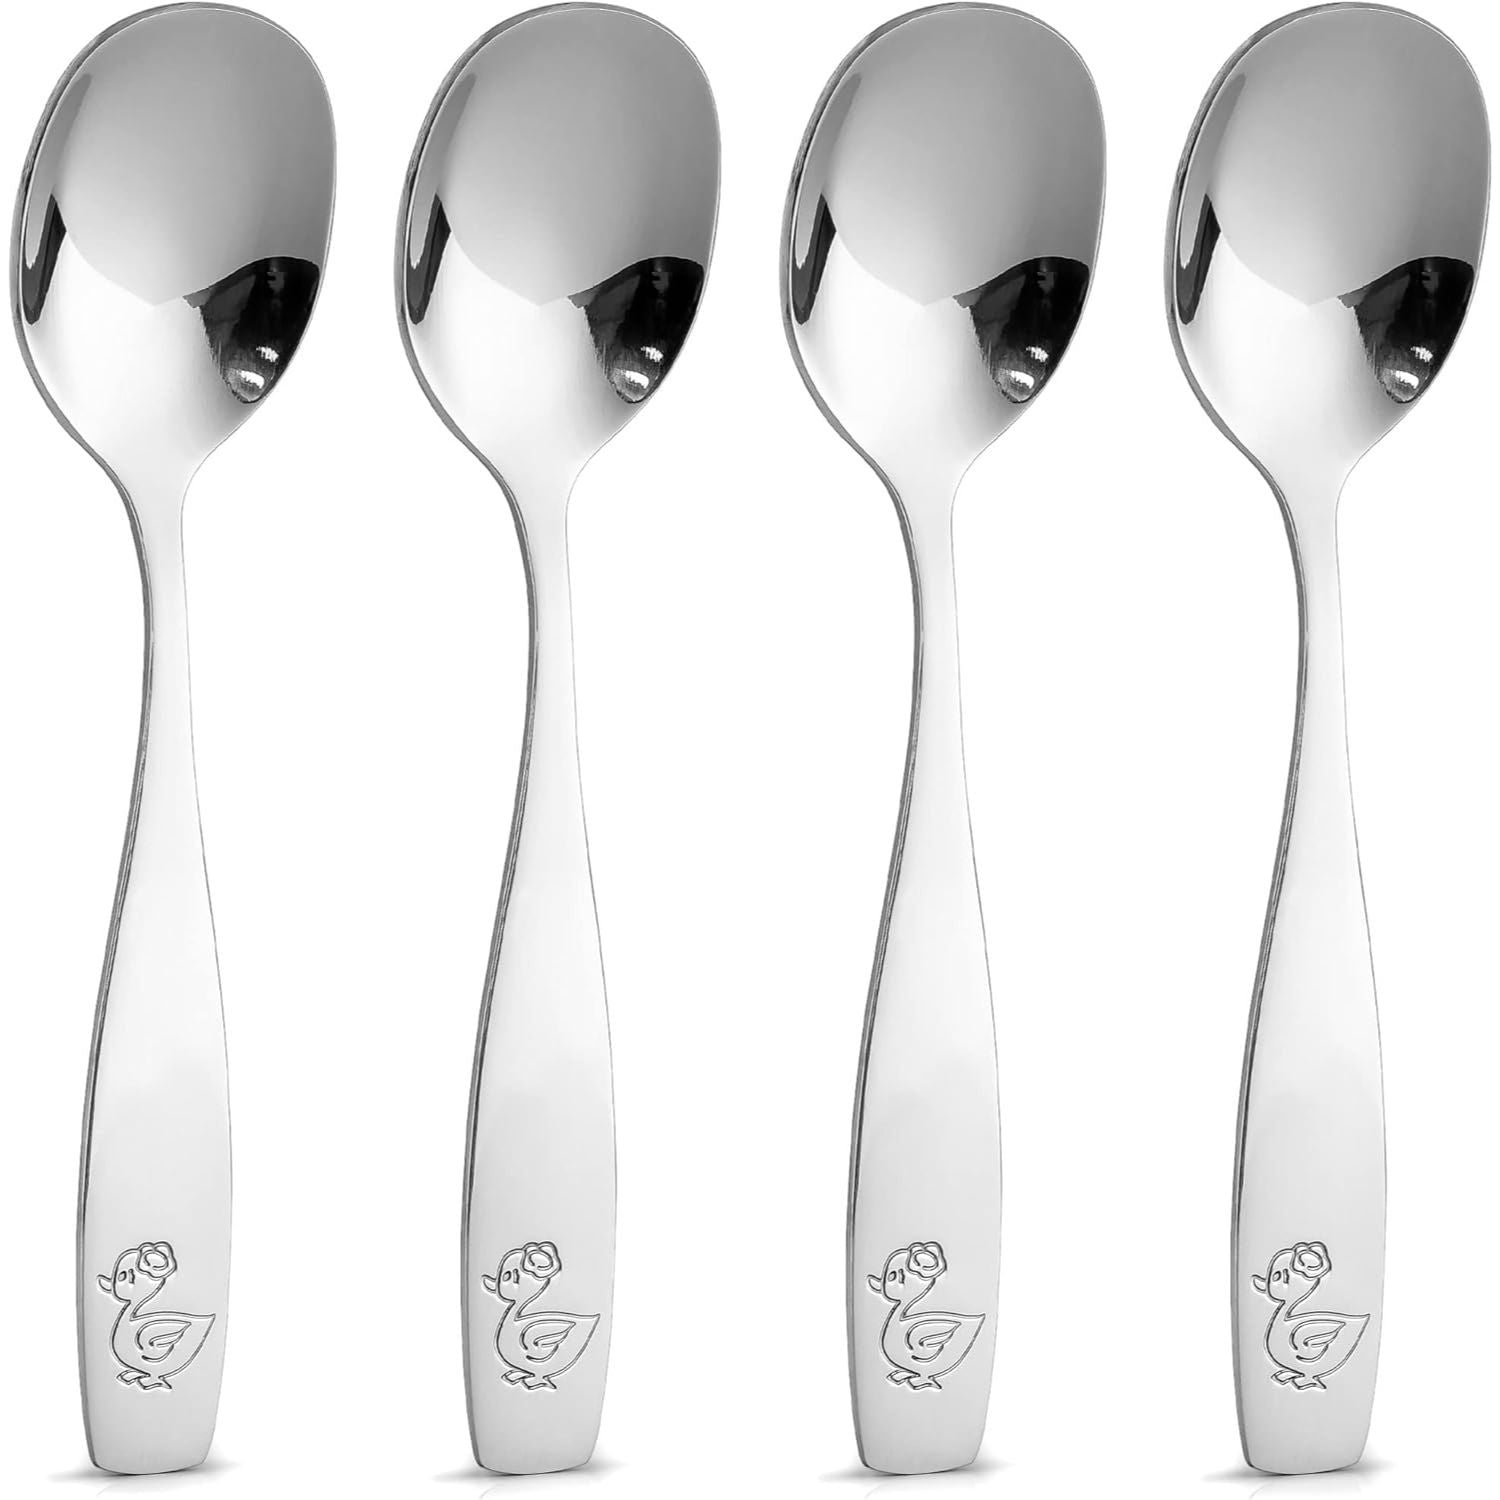 Feeding Spoons & Cover - Baby's Cutlery